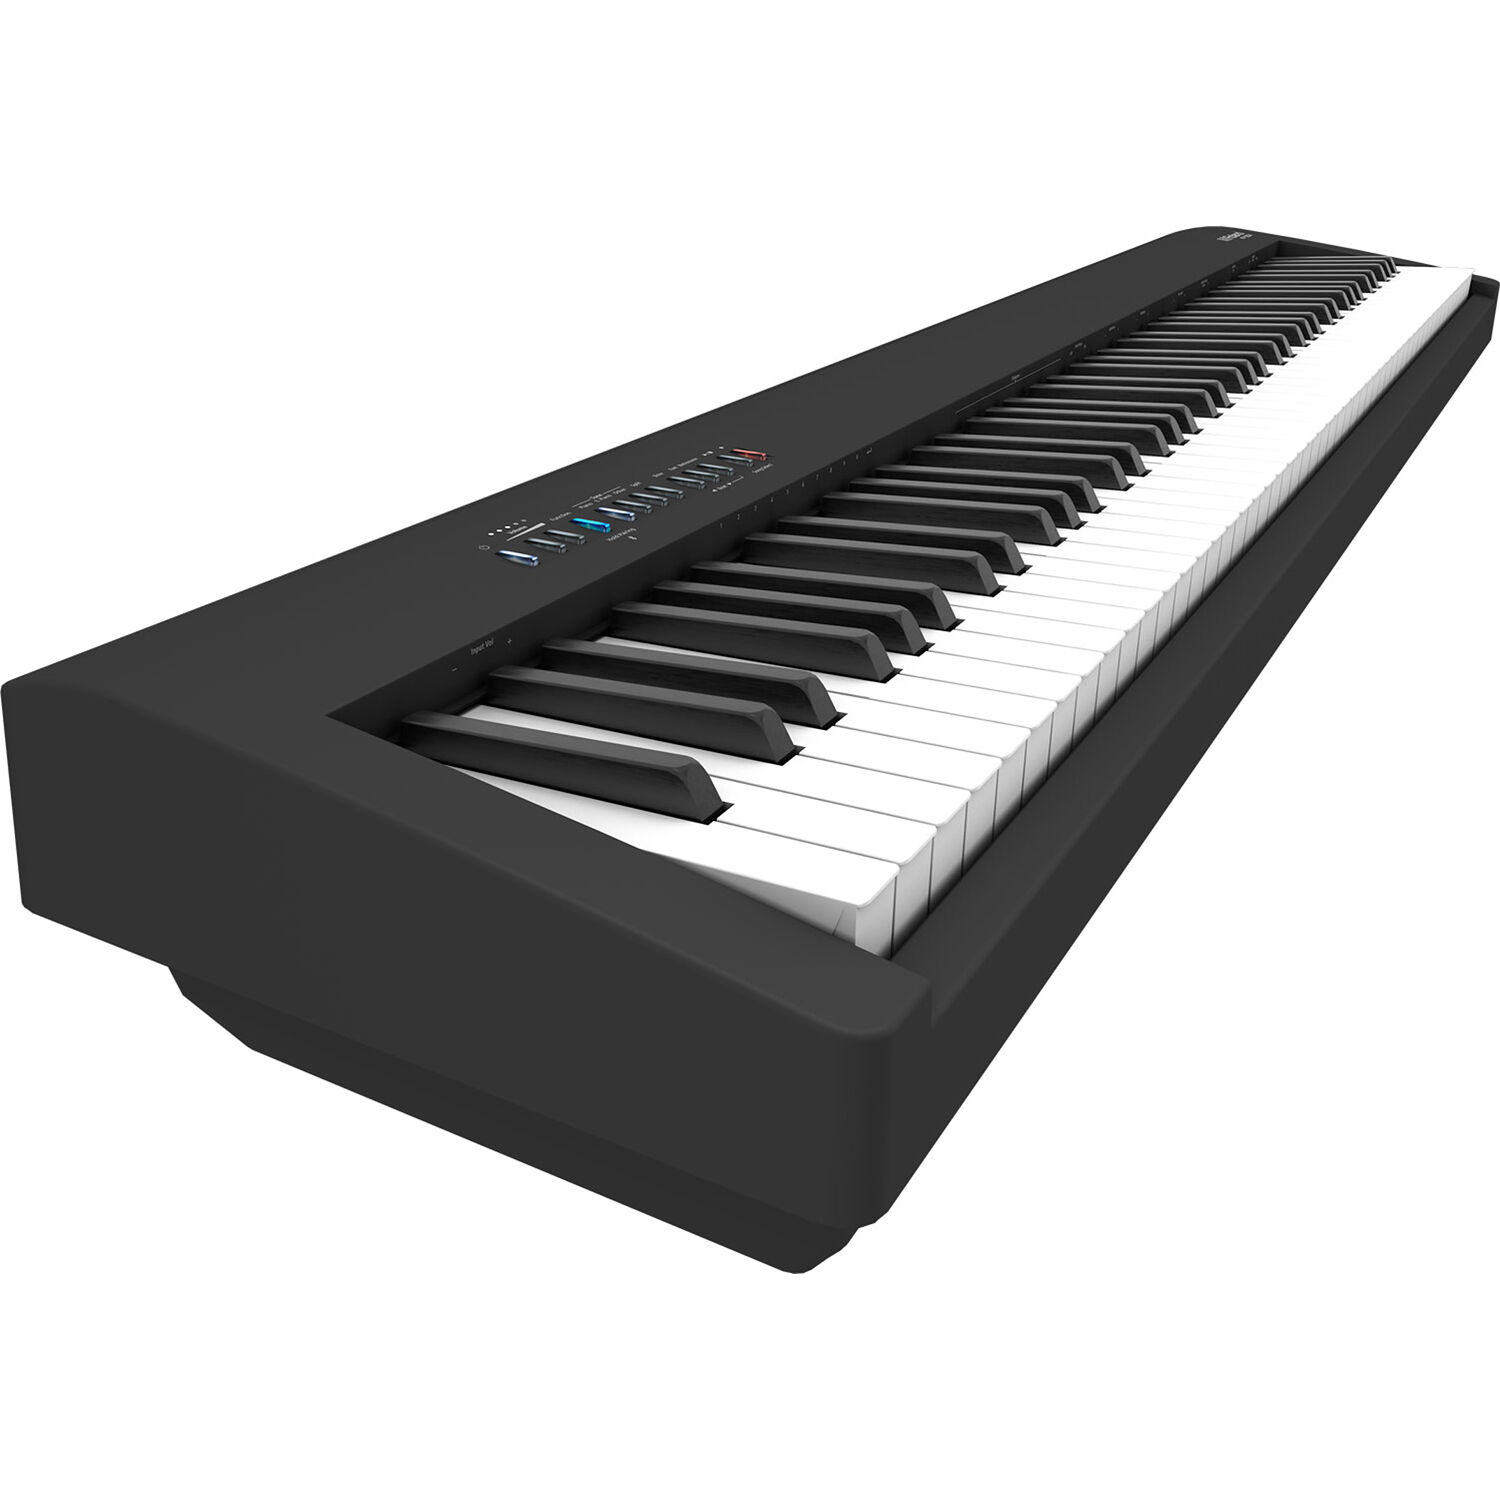 Roland Fp 30x Portable Digital Piano With Bluetooth Fp 30x Bk